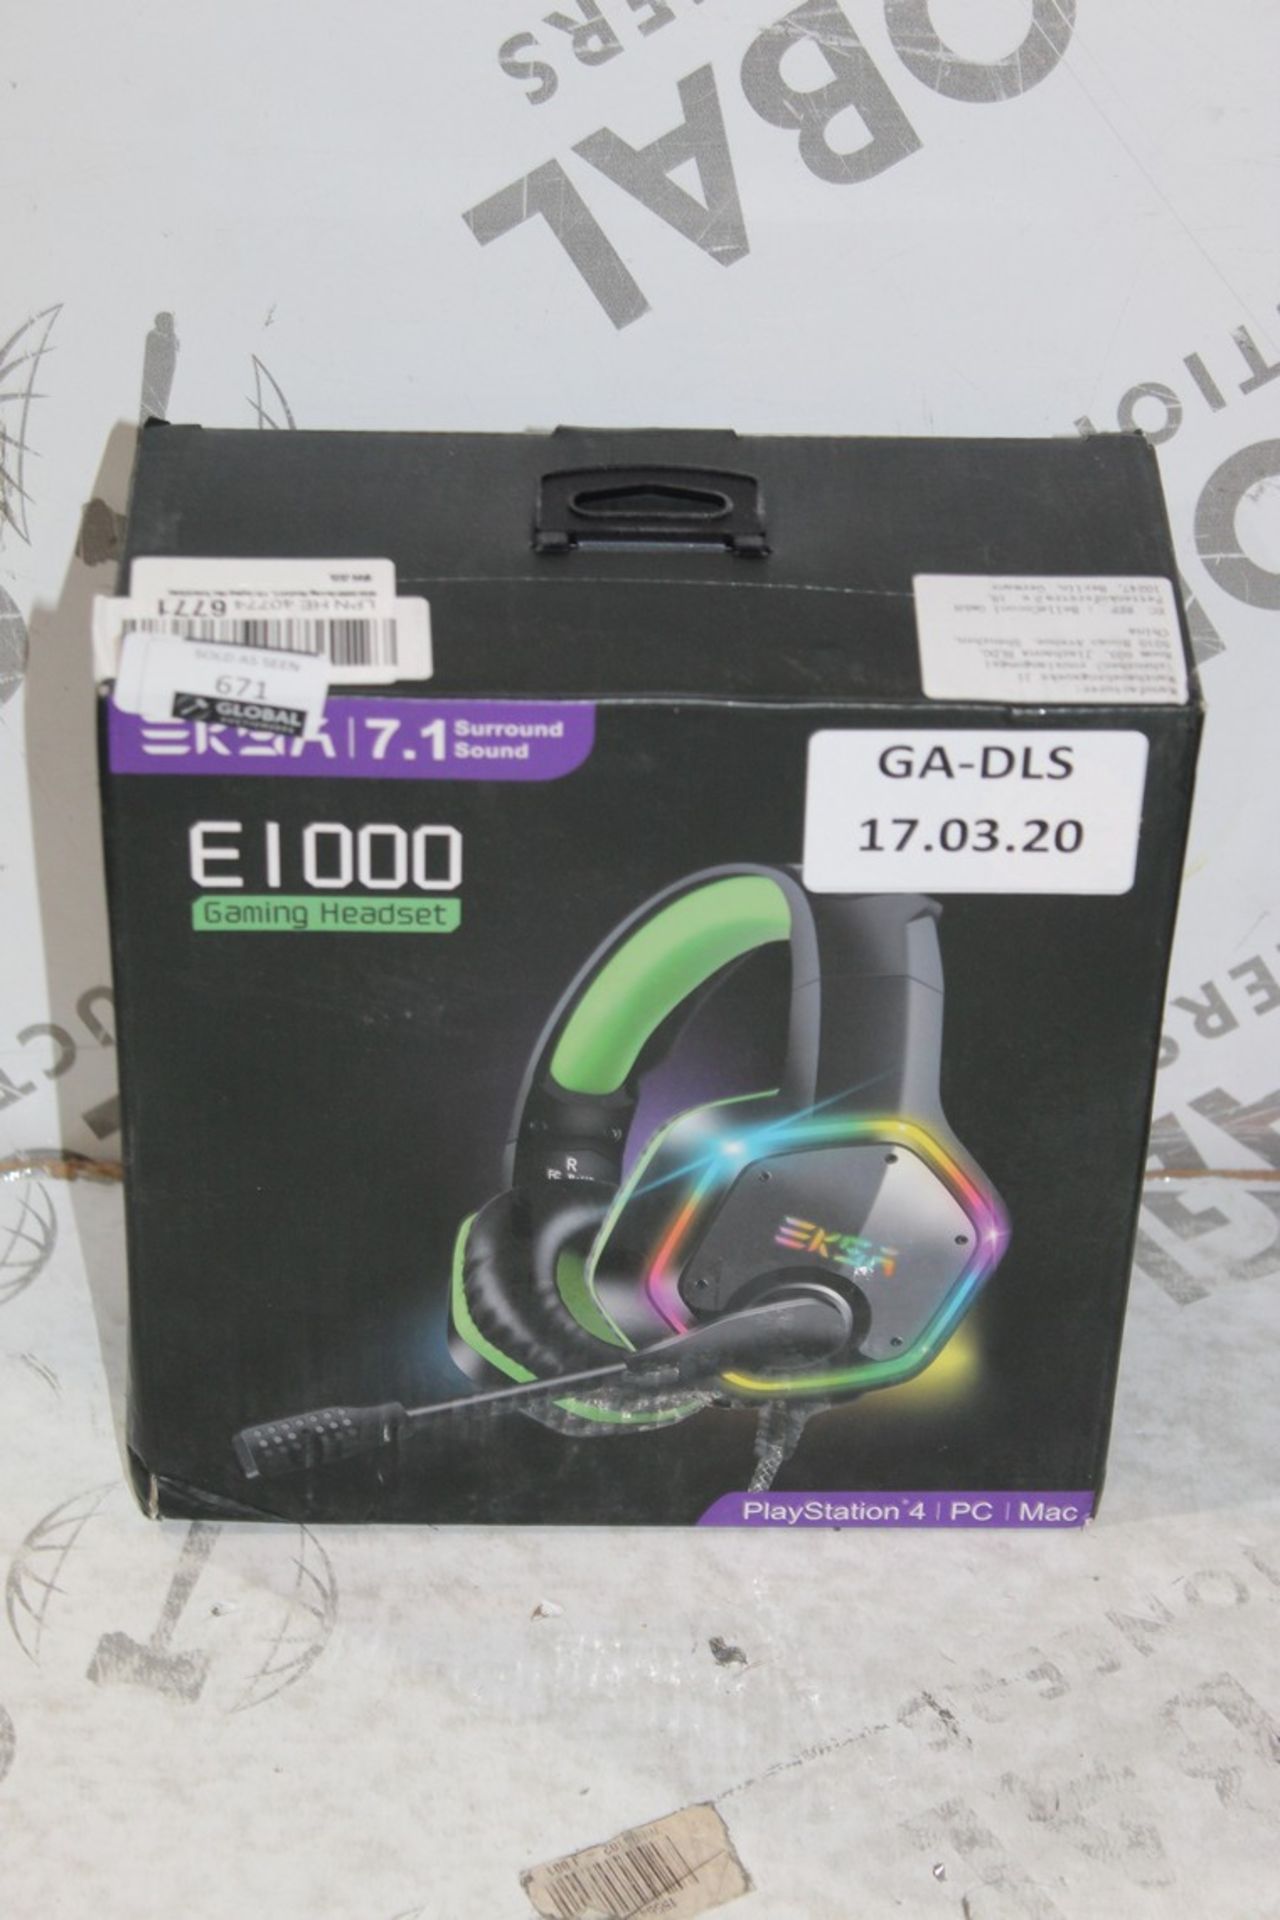 Boxed Brand New Pairs Of EKSA E1000 Black And Green Gaming Headsets With 7.1 Channels Surround Sound